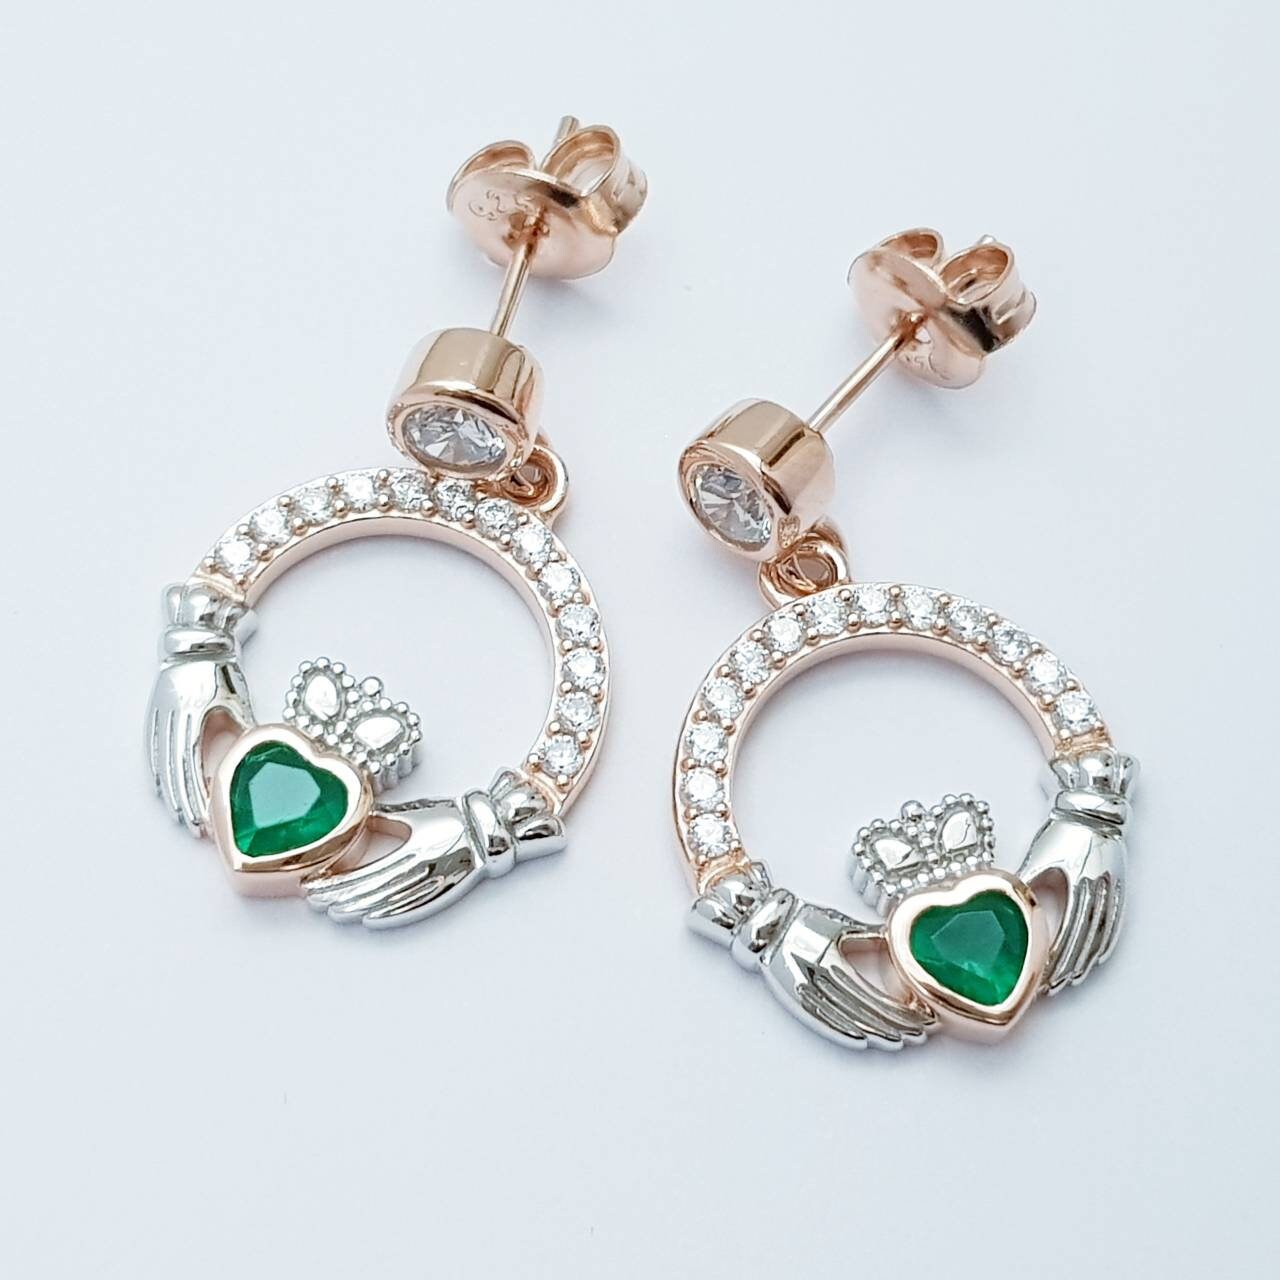 Emerald green claddagh Earrings, Silver and rose gold Claddagh Earrings, Claddagh drop Earrings